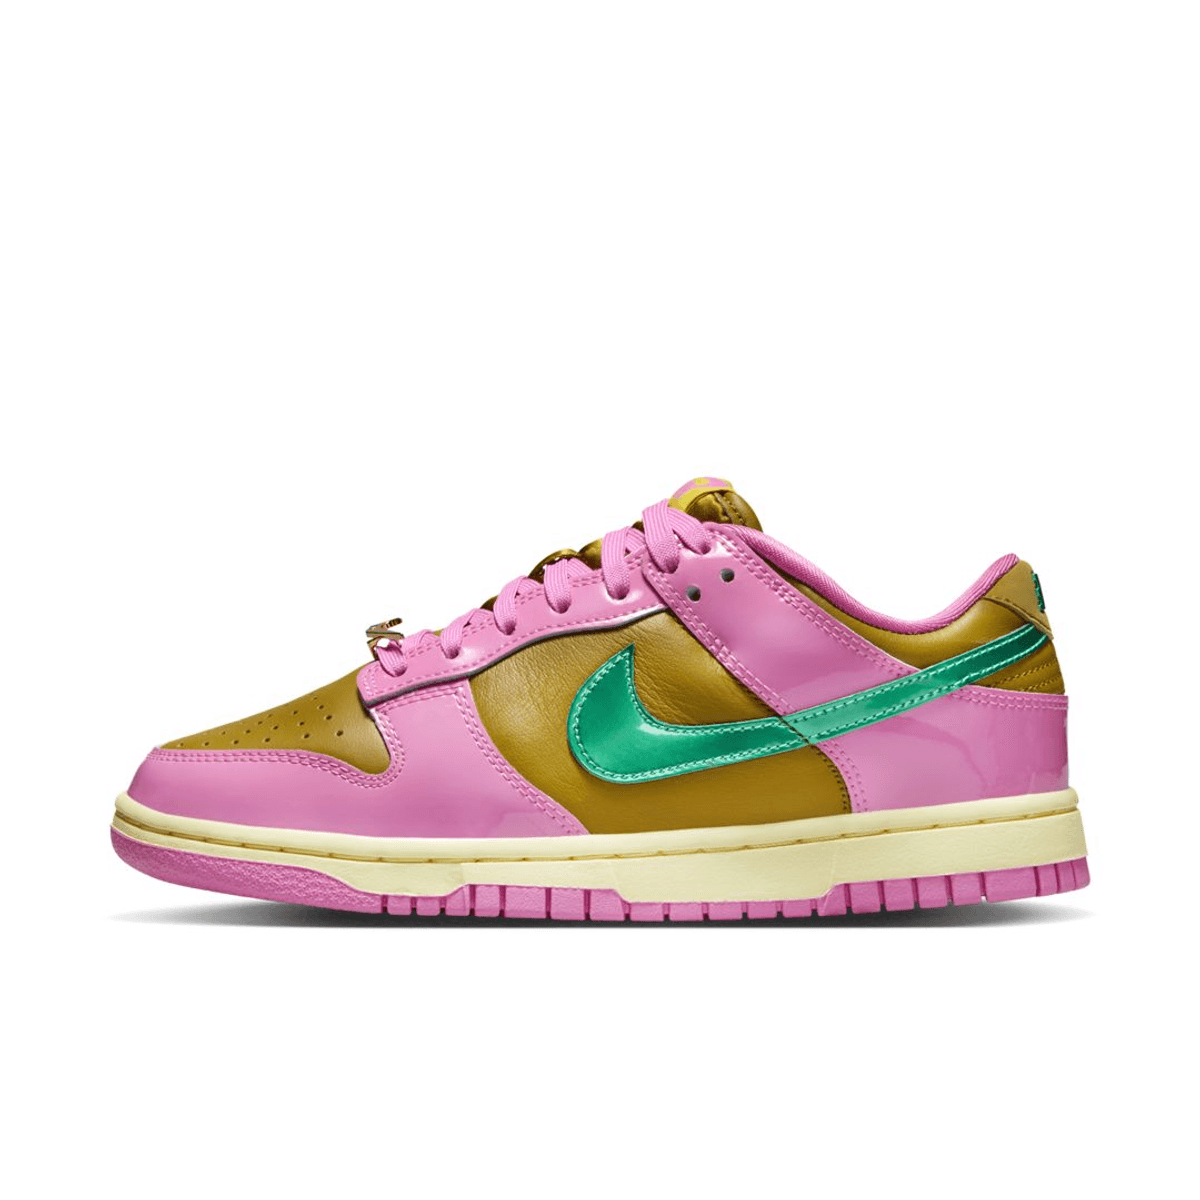 The Parris Goebel x Nike Dunk Low Releases October 9th